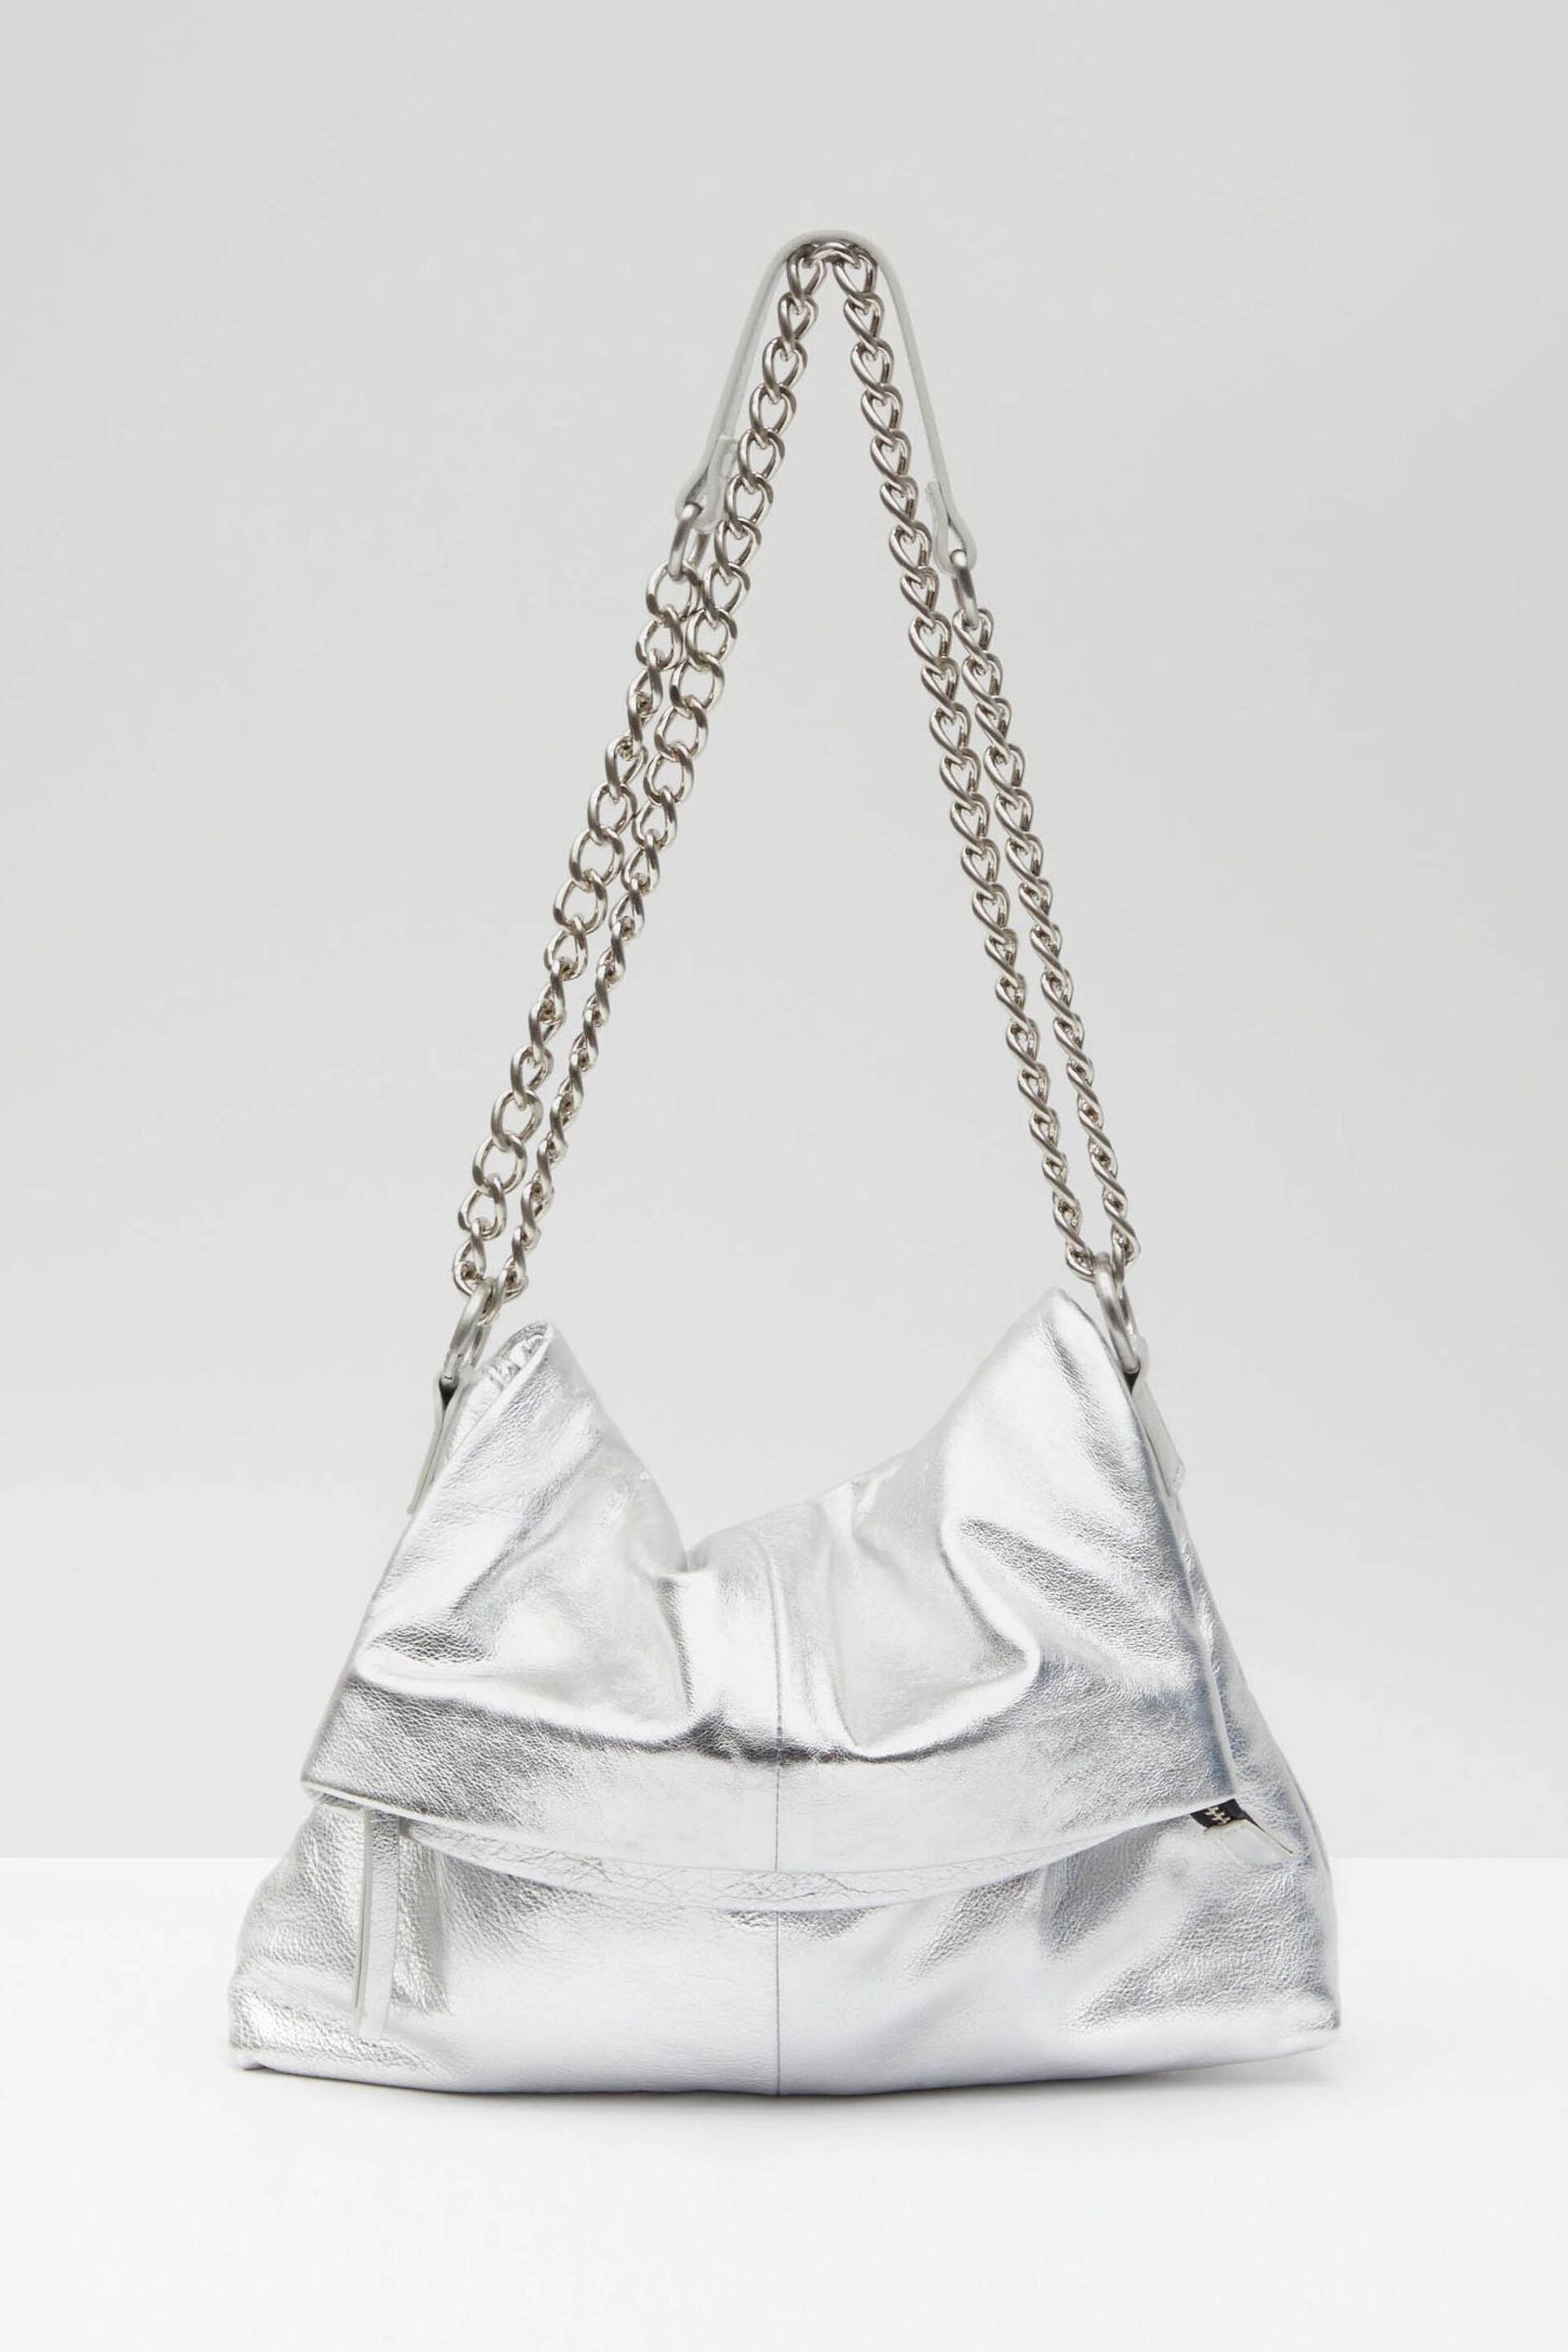 Hush Silver Perrie Chain Cross-body Bag - Image 2 of 5